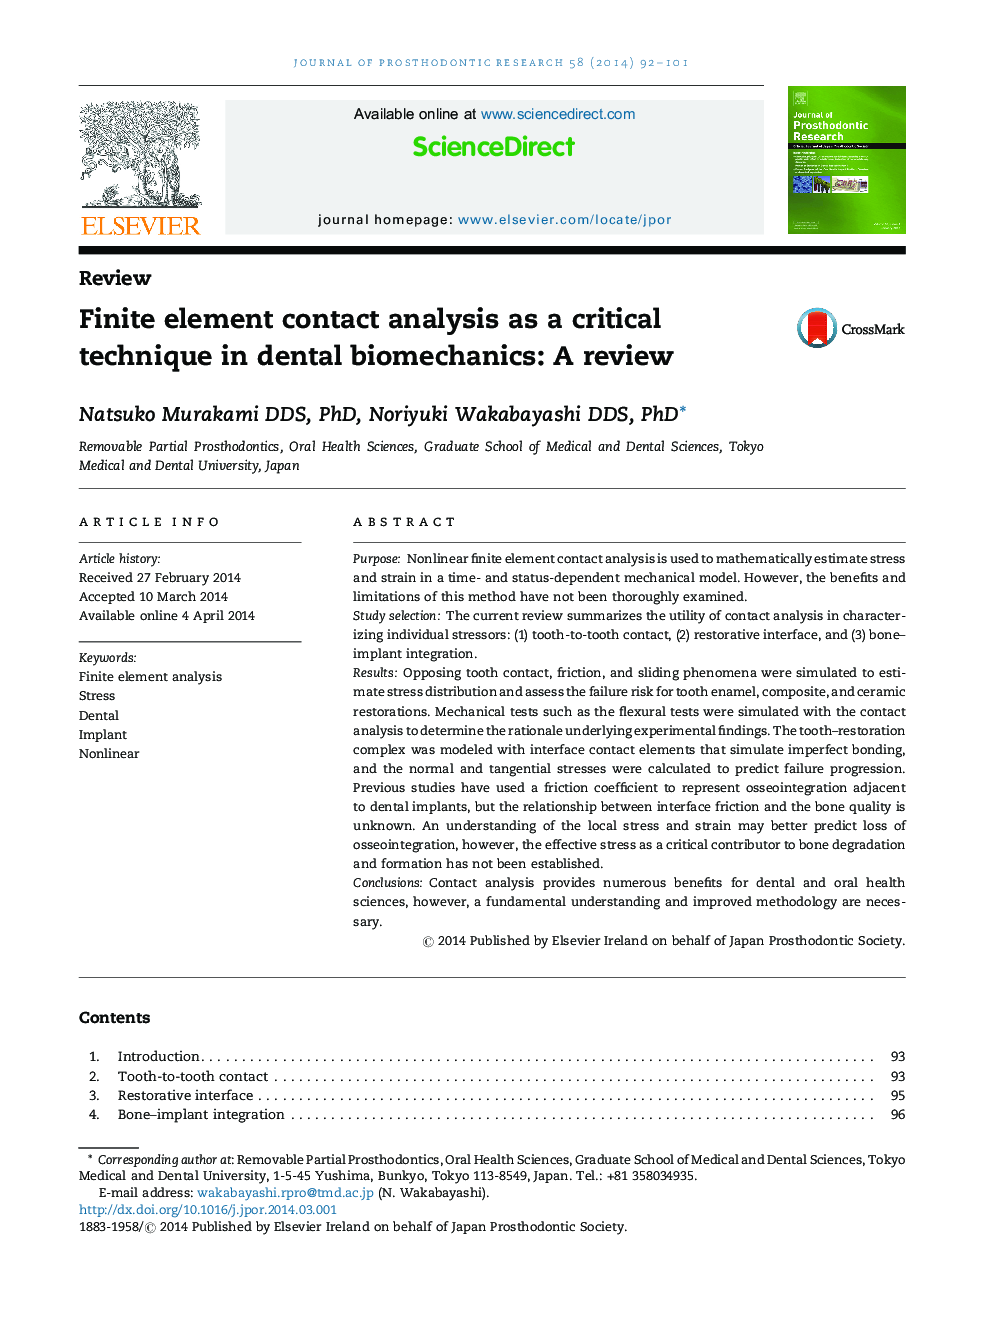 Finite element contact analysis as a critical technique in dental biomechanics: A review